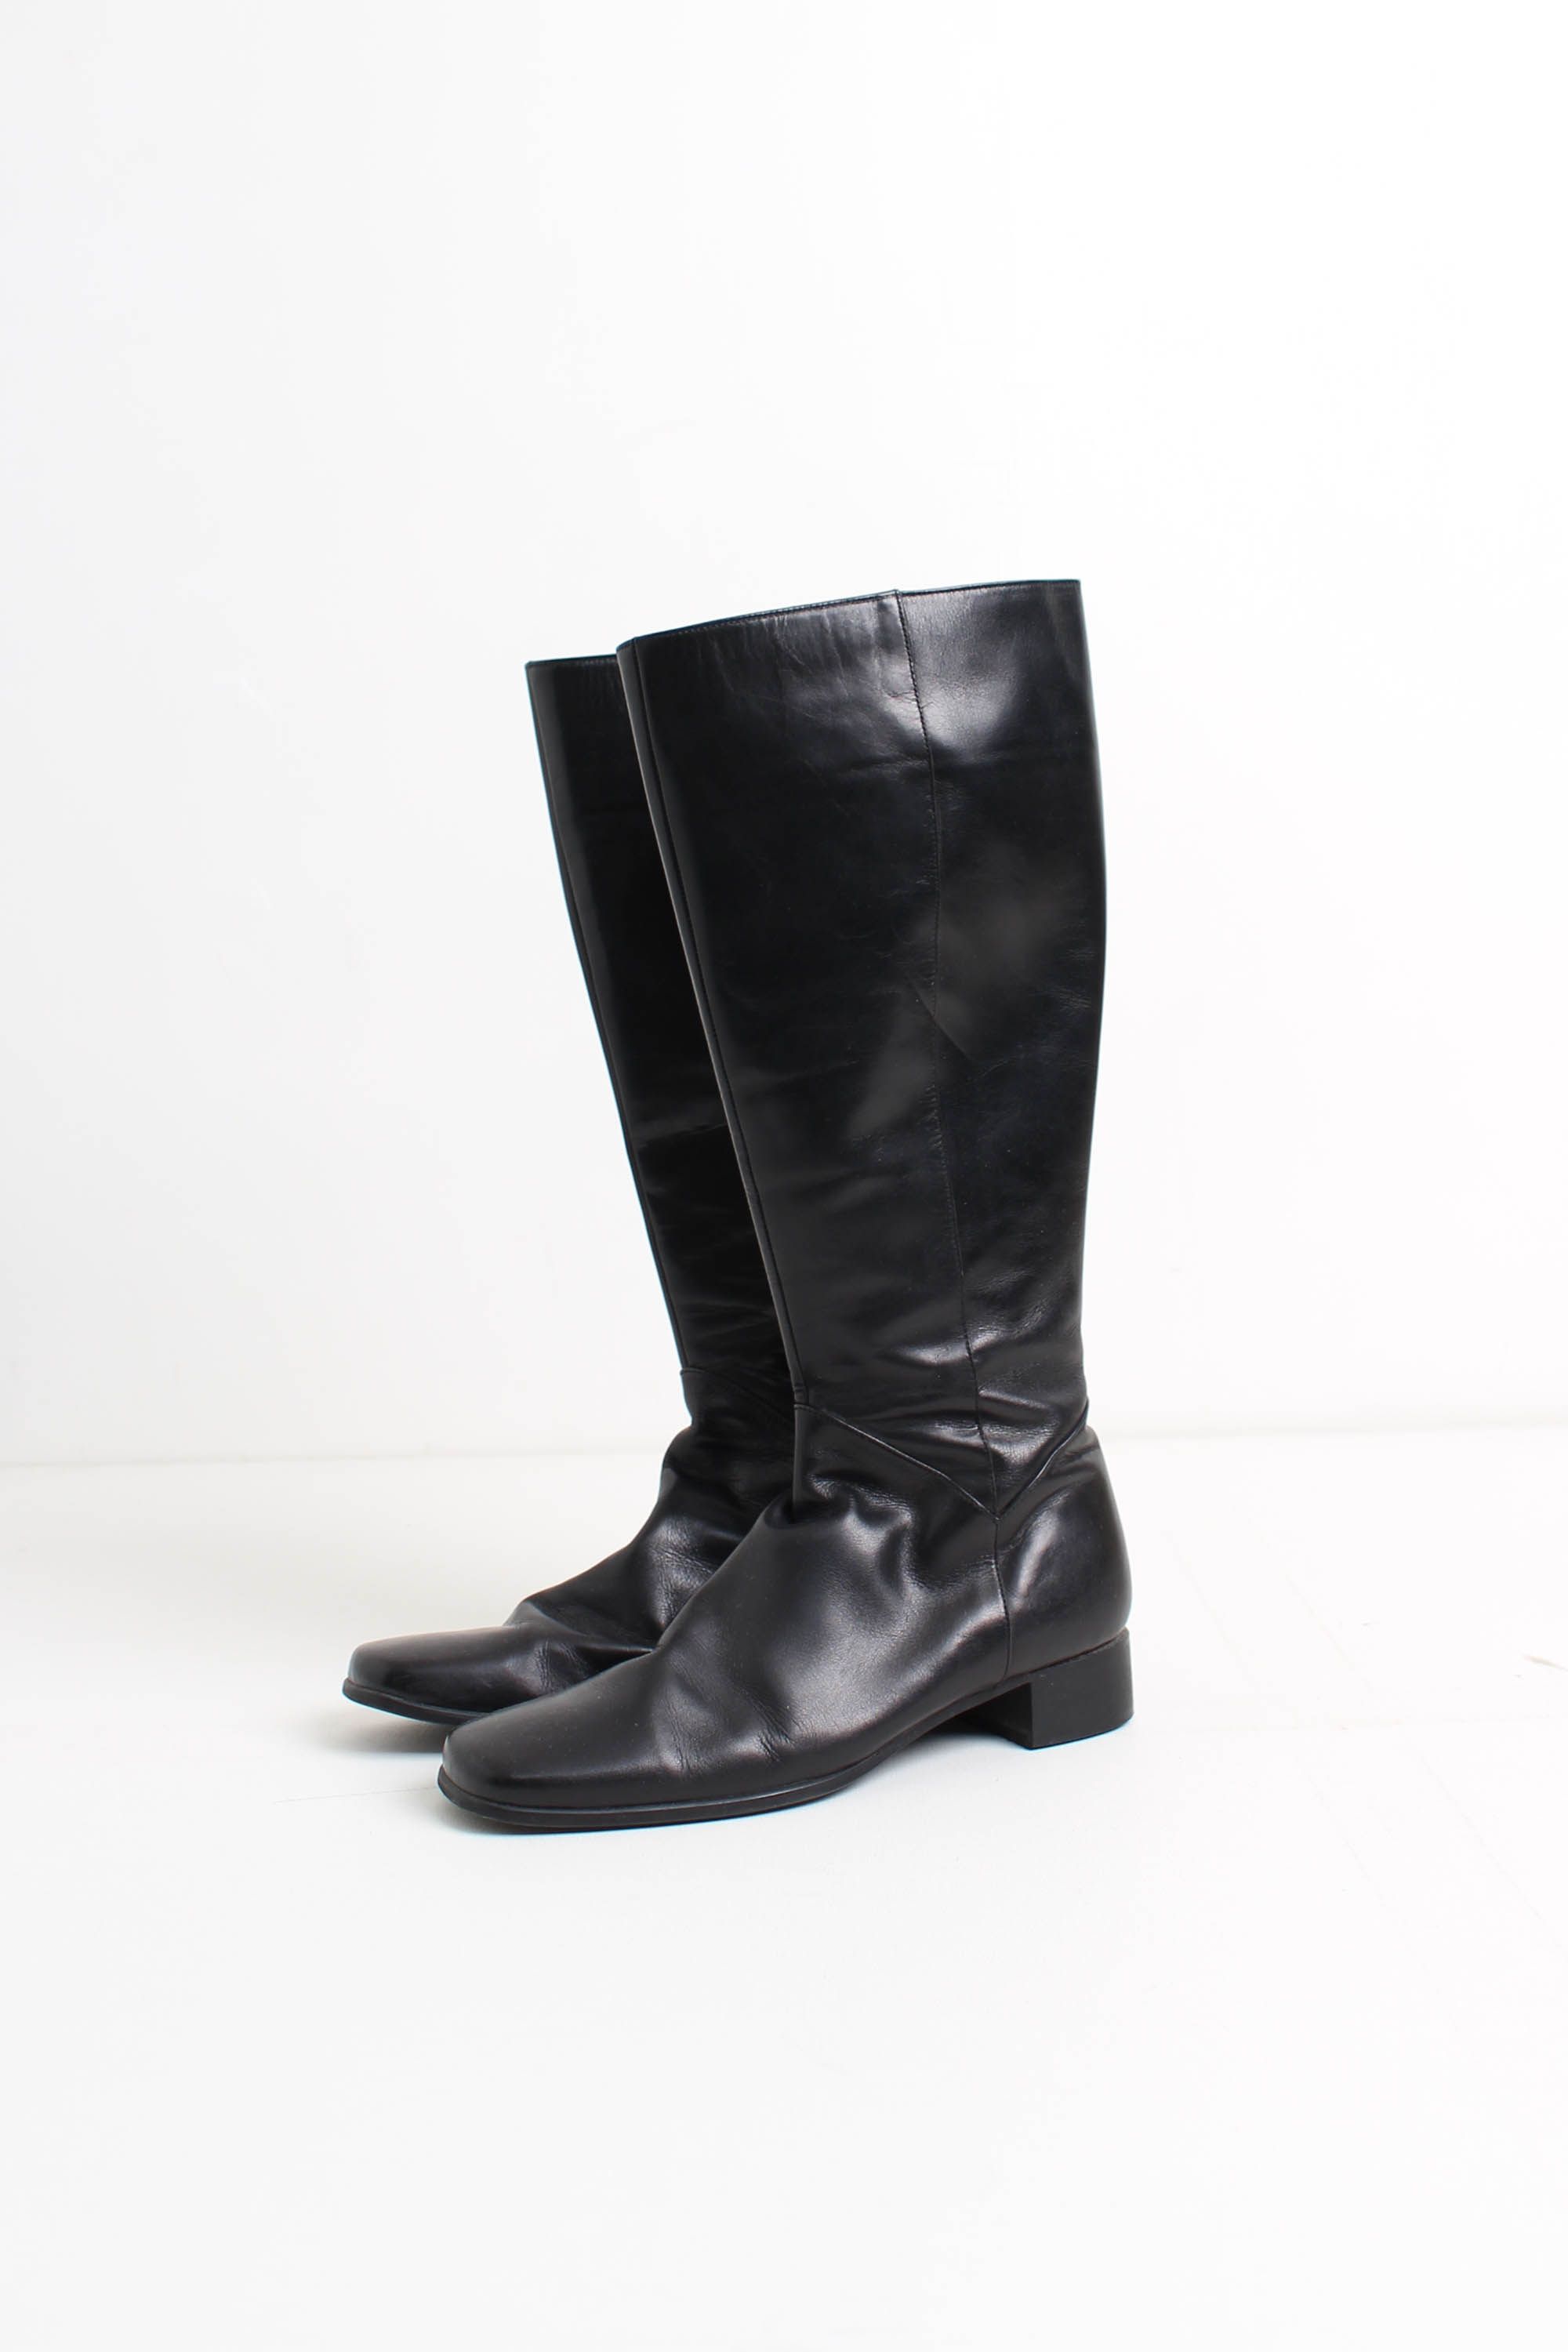 ing leather boots